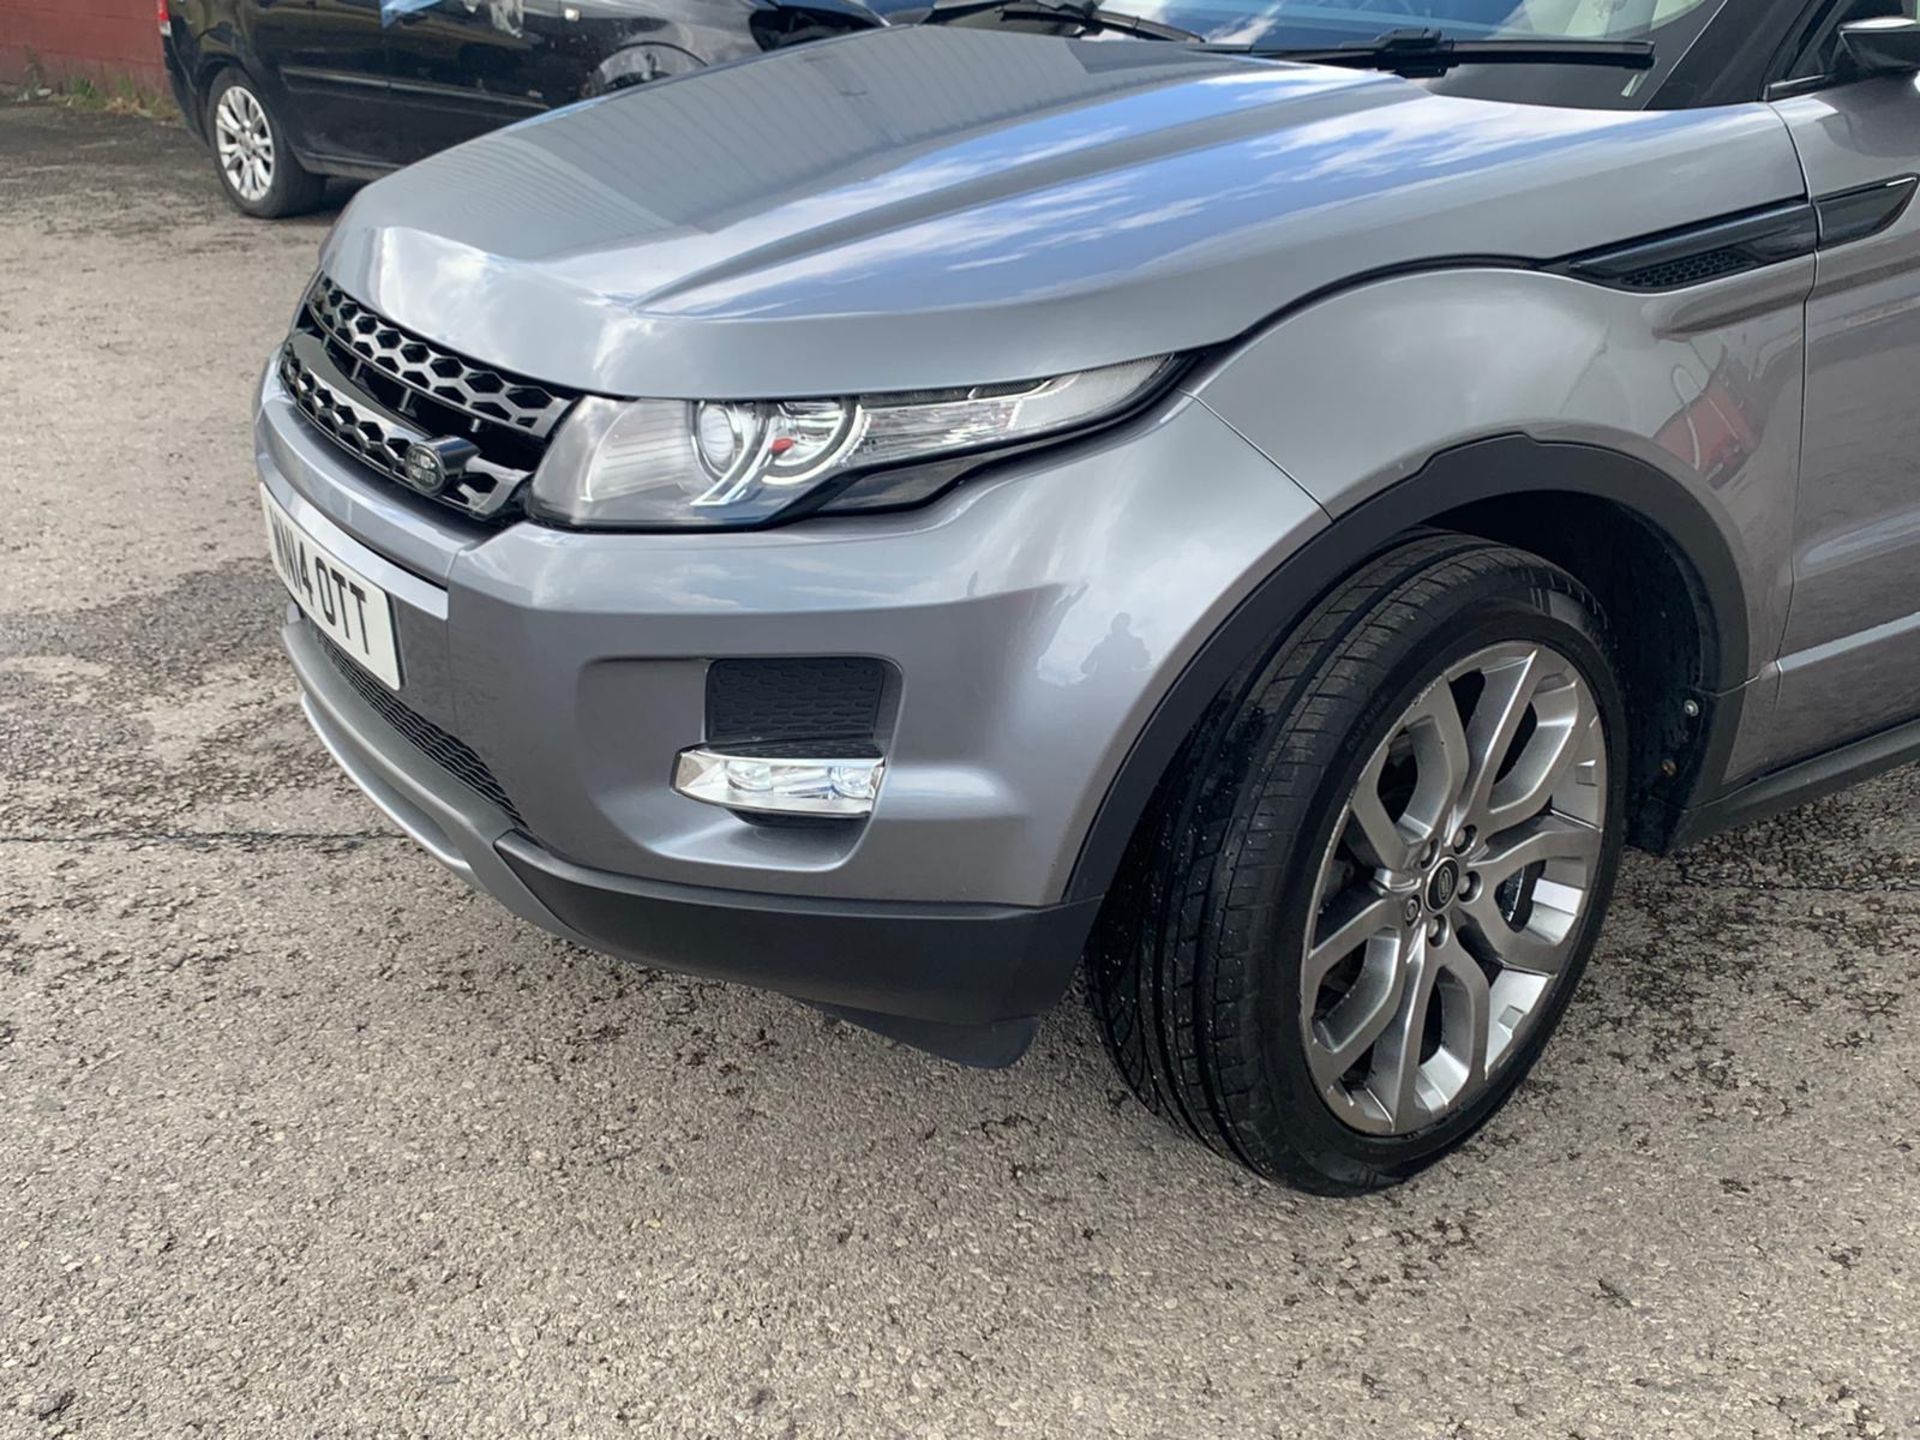 2014/14 REG LAND ROVER RANGE ROVER EVOQUE DYNAMIC S 2.2 DIESEL GREY, SHOWING 2 FORMER KEEPERS - Image 2 of 13